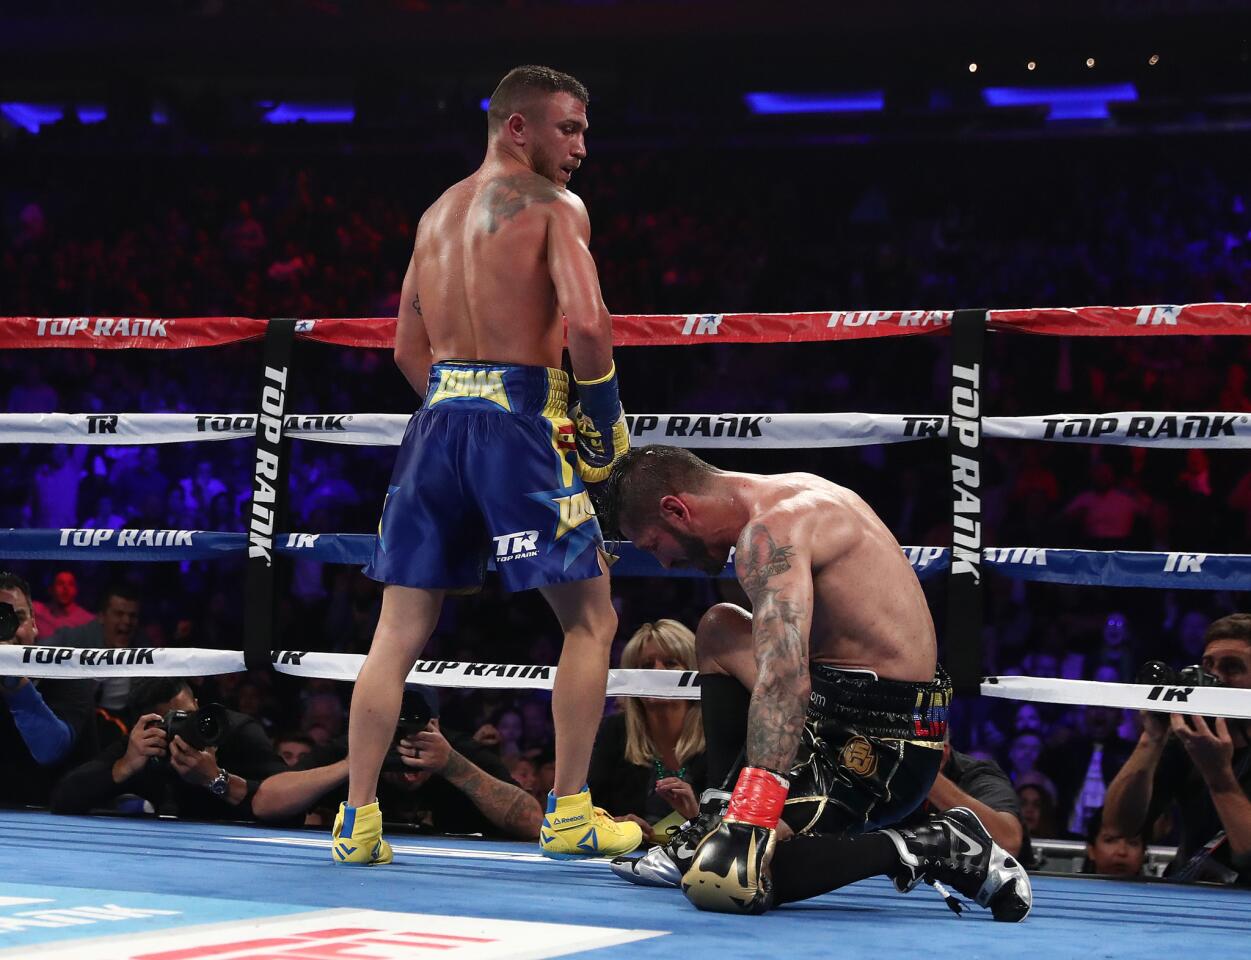 NEW YORK, NY - MAY 12: Vasiliy Lomachenko knocks down Jorge Linares in the tenth round during their WBA lightweight title fight at Madison Square Garden on May 12, 2018 in New York City. (Photo by Al Bello/Getty Images) ** OUTS - ELSENT, FPG, CM - OUTS * NM, PH, VA if sourced by CT, LA or MoD **